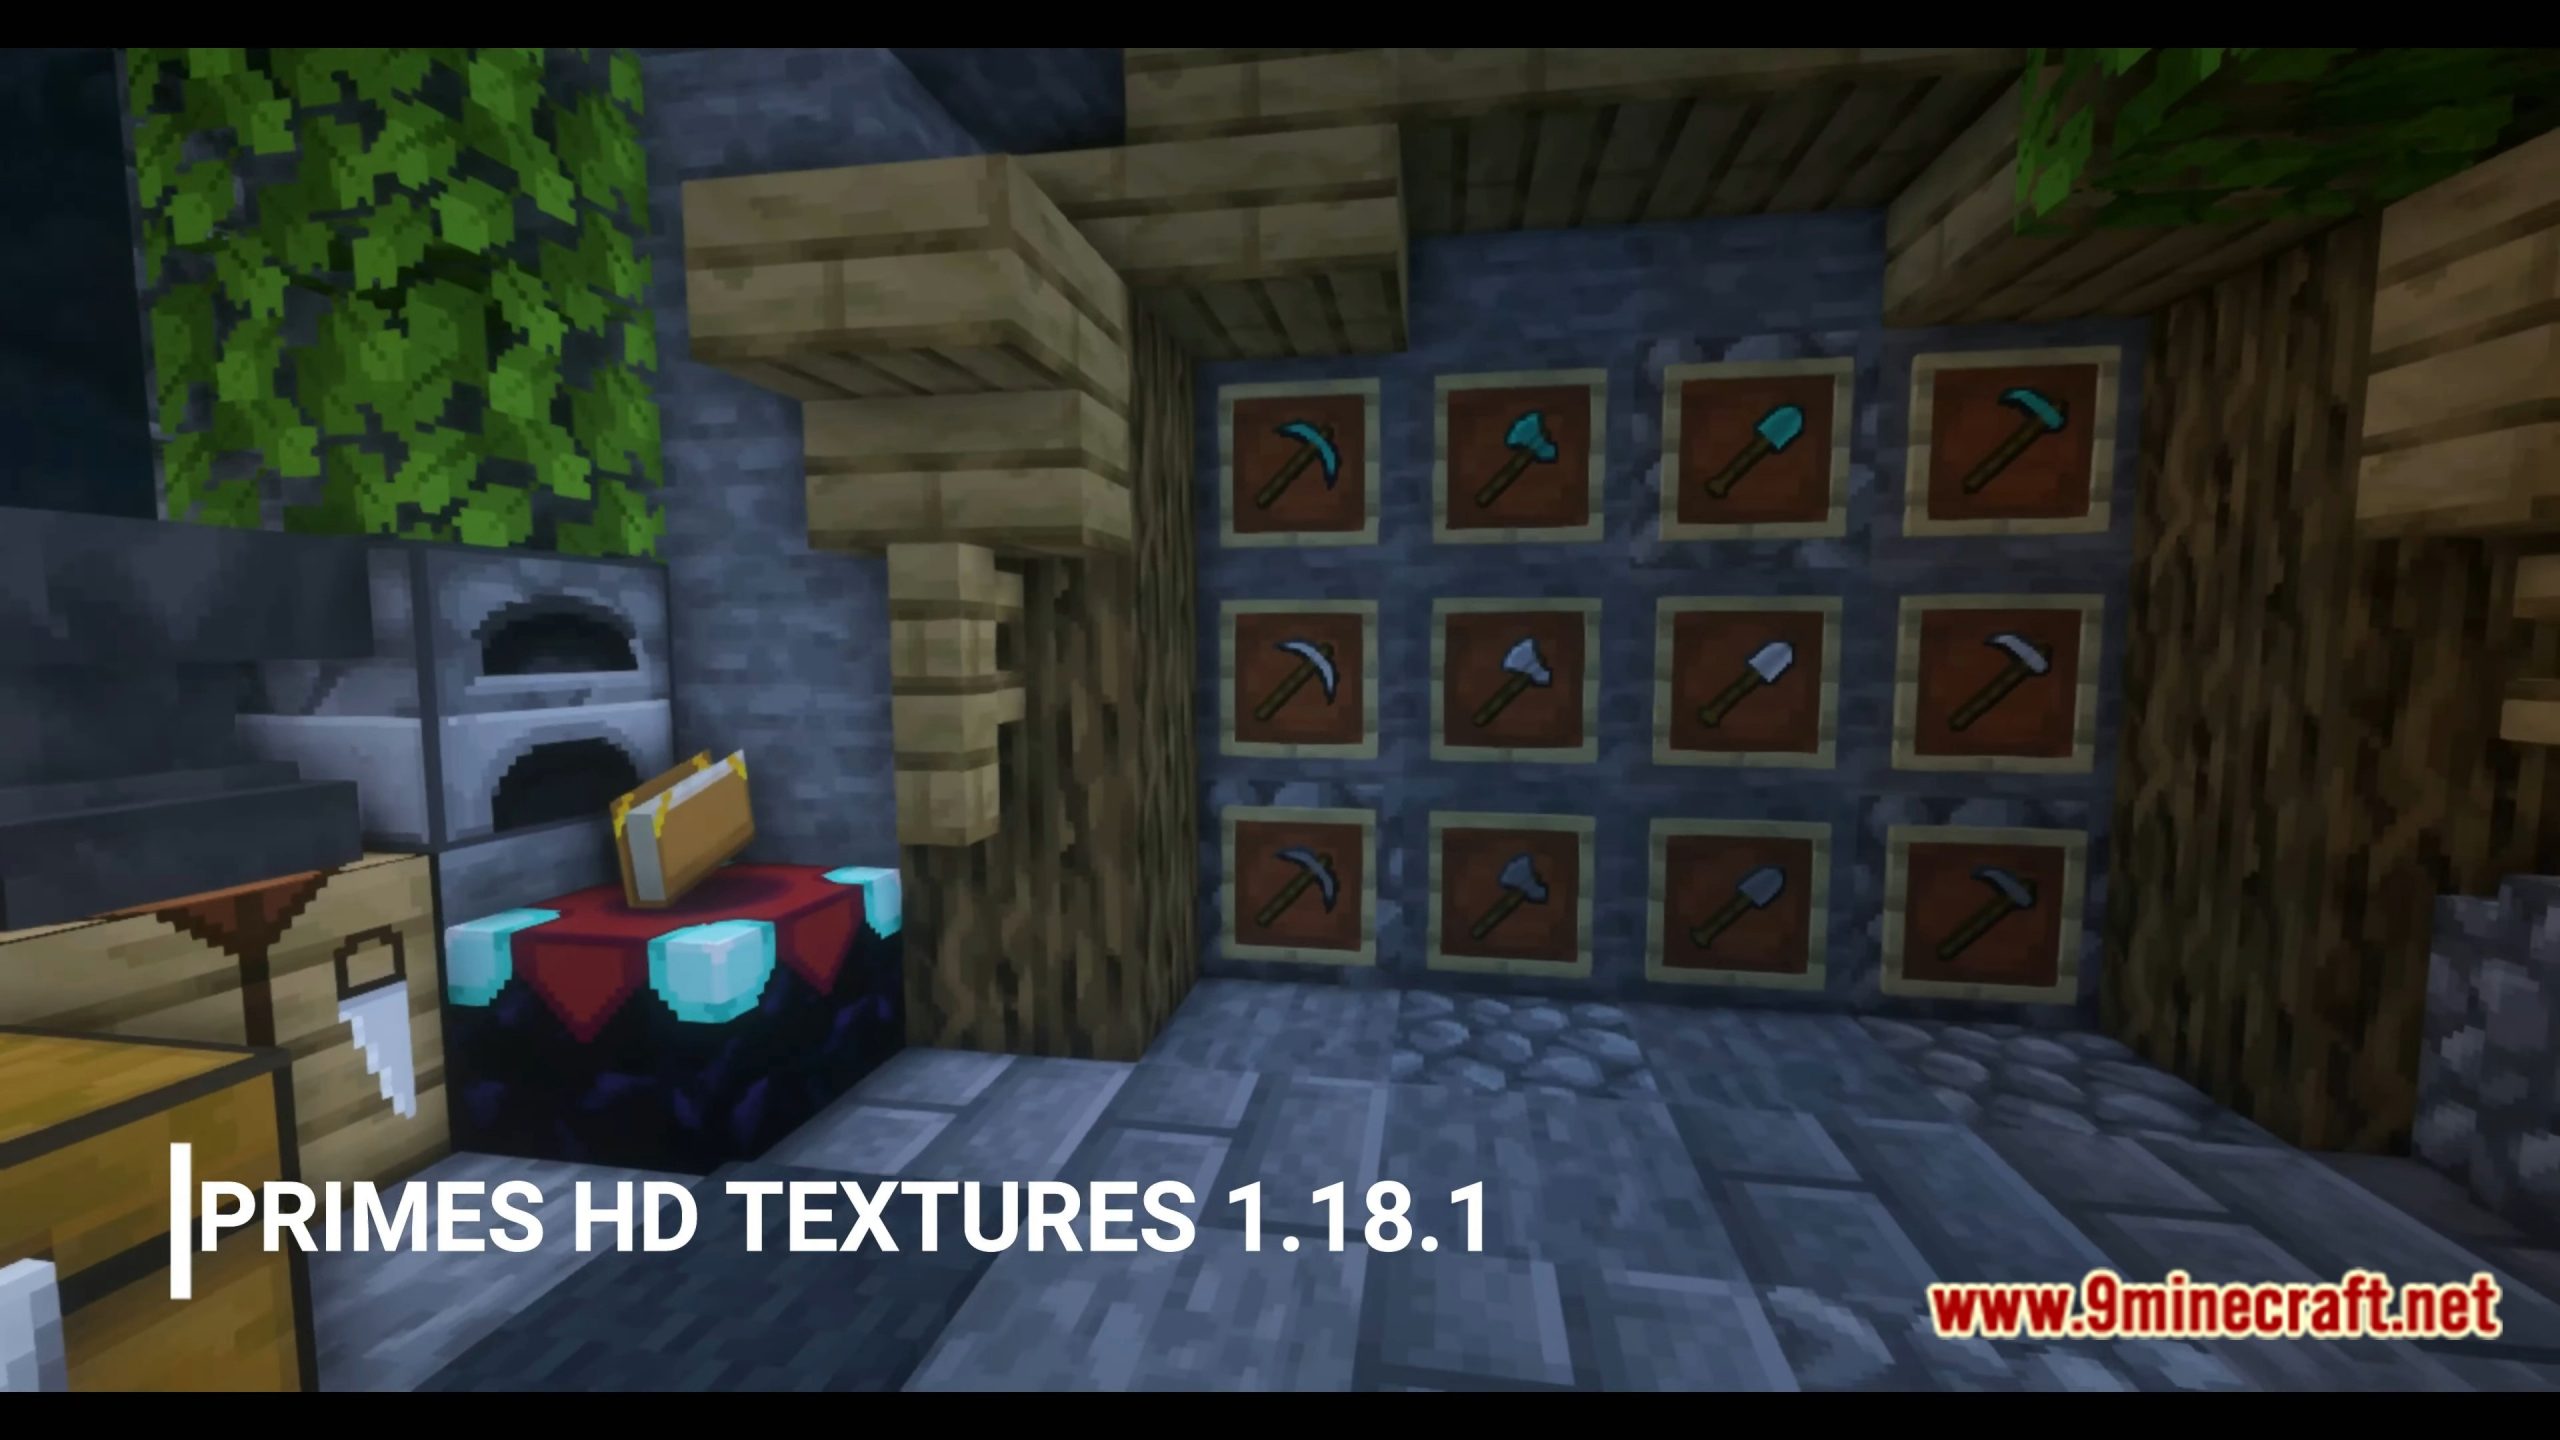 Prime's HD Resource Pack (1.20.2, 1.19.4) - Texture Pack 8